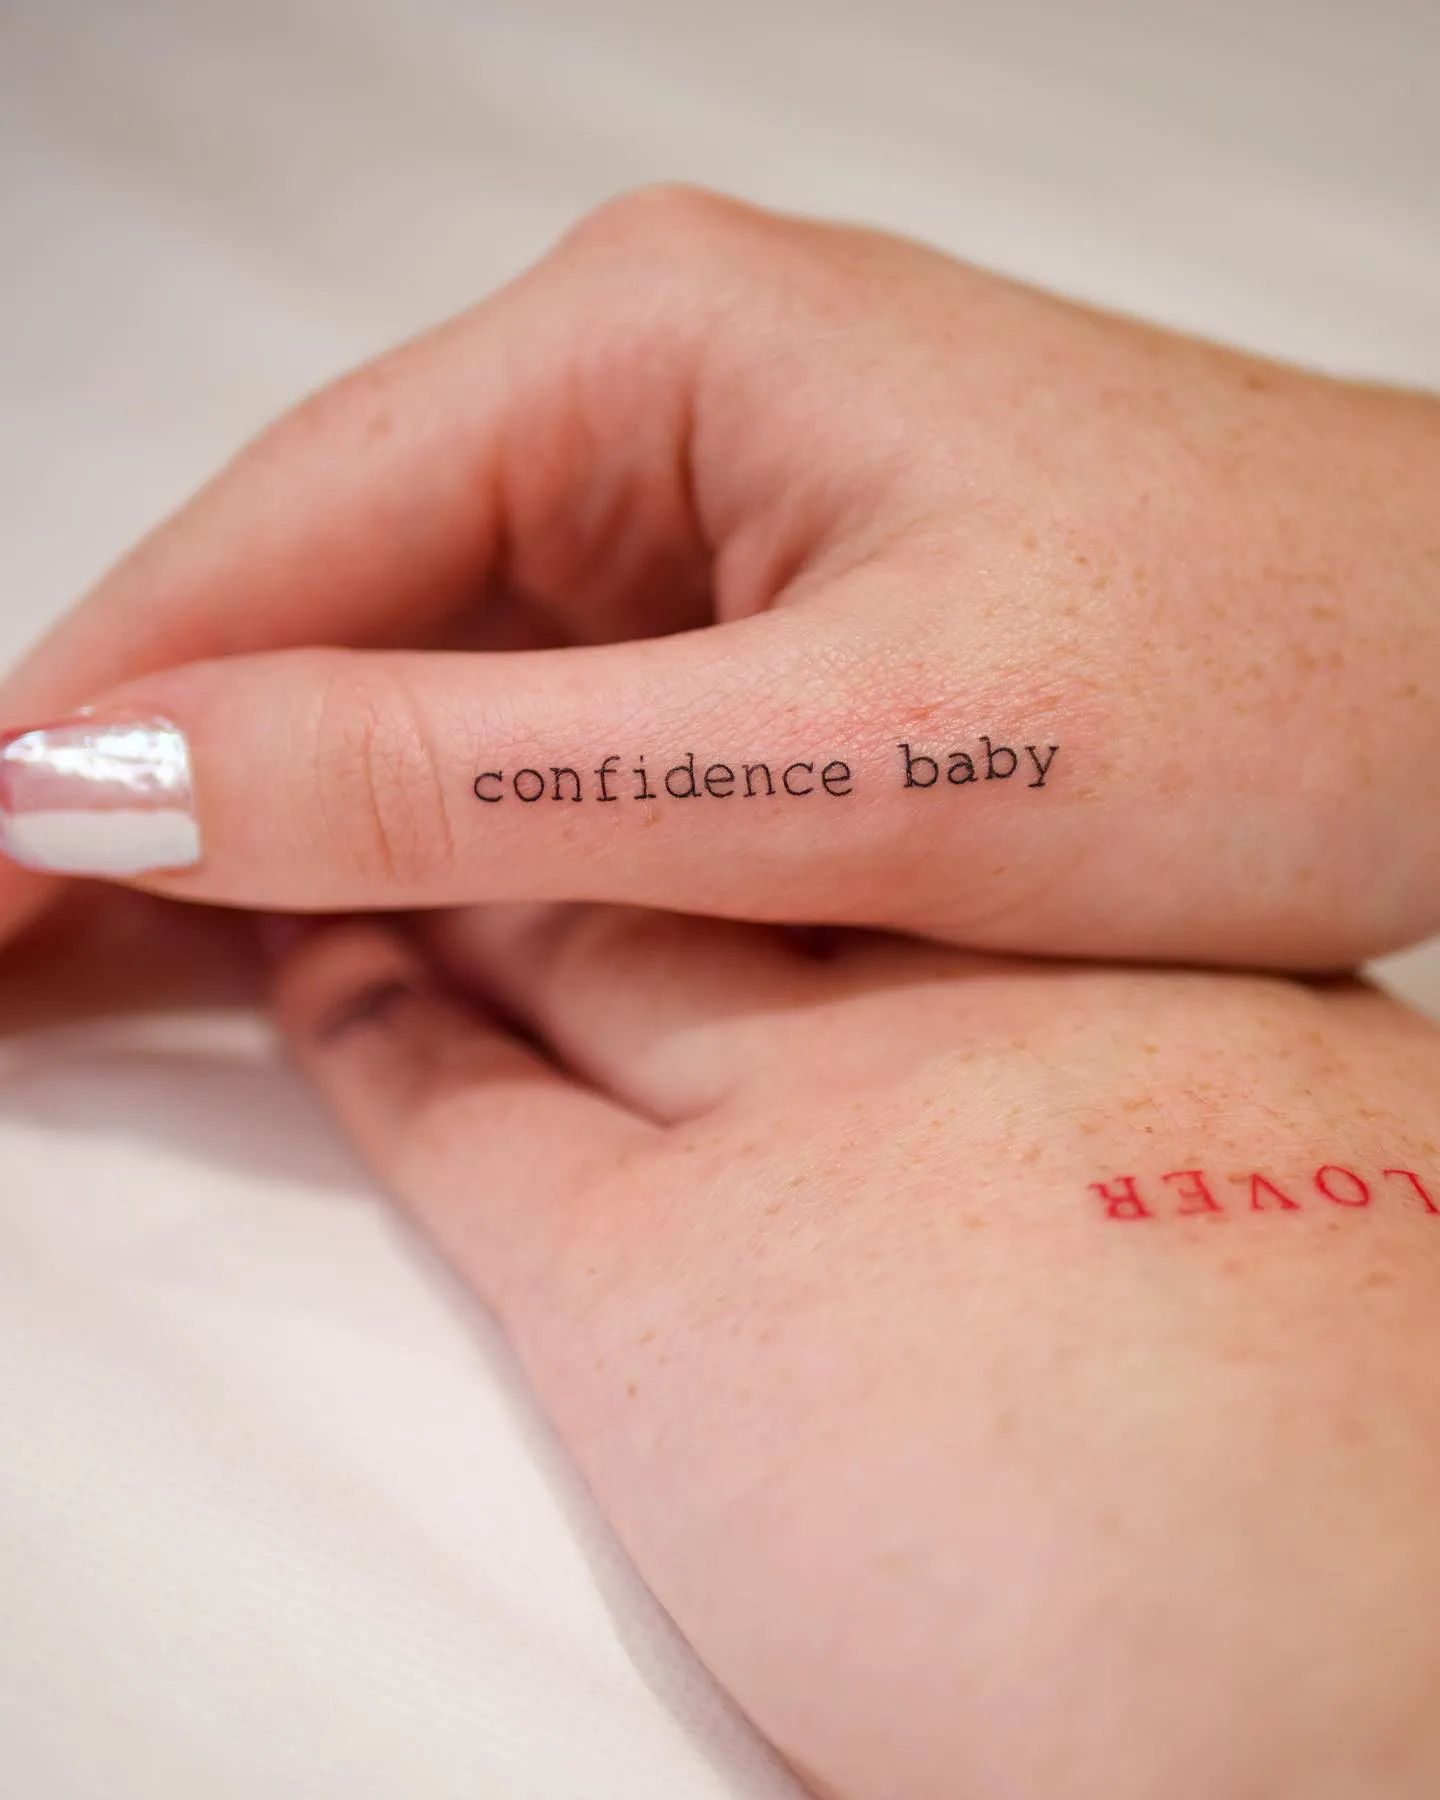 Empowering 'confidence baby' Phrase Tattoo on Hand Side